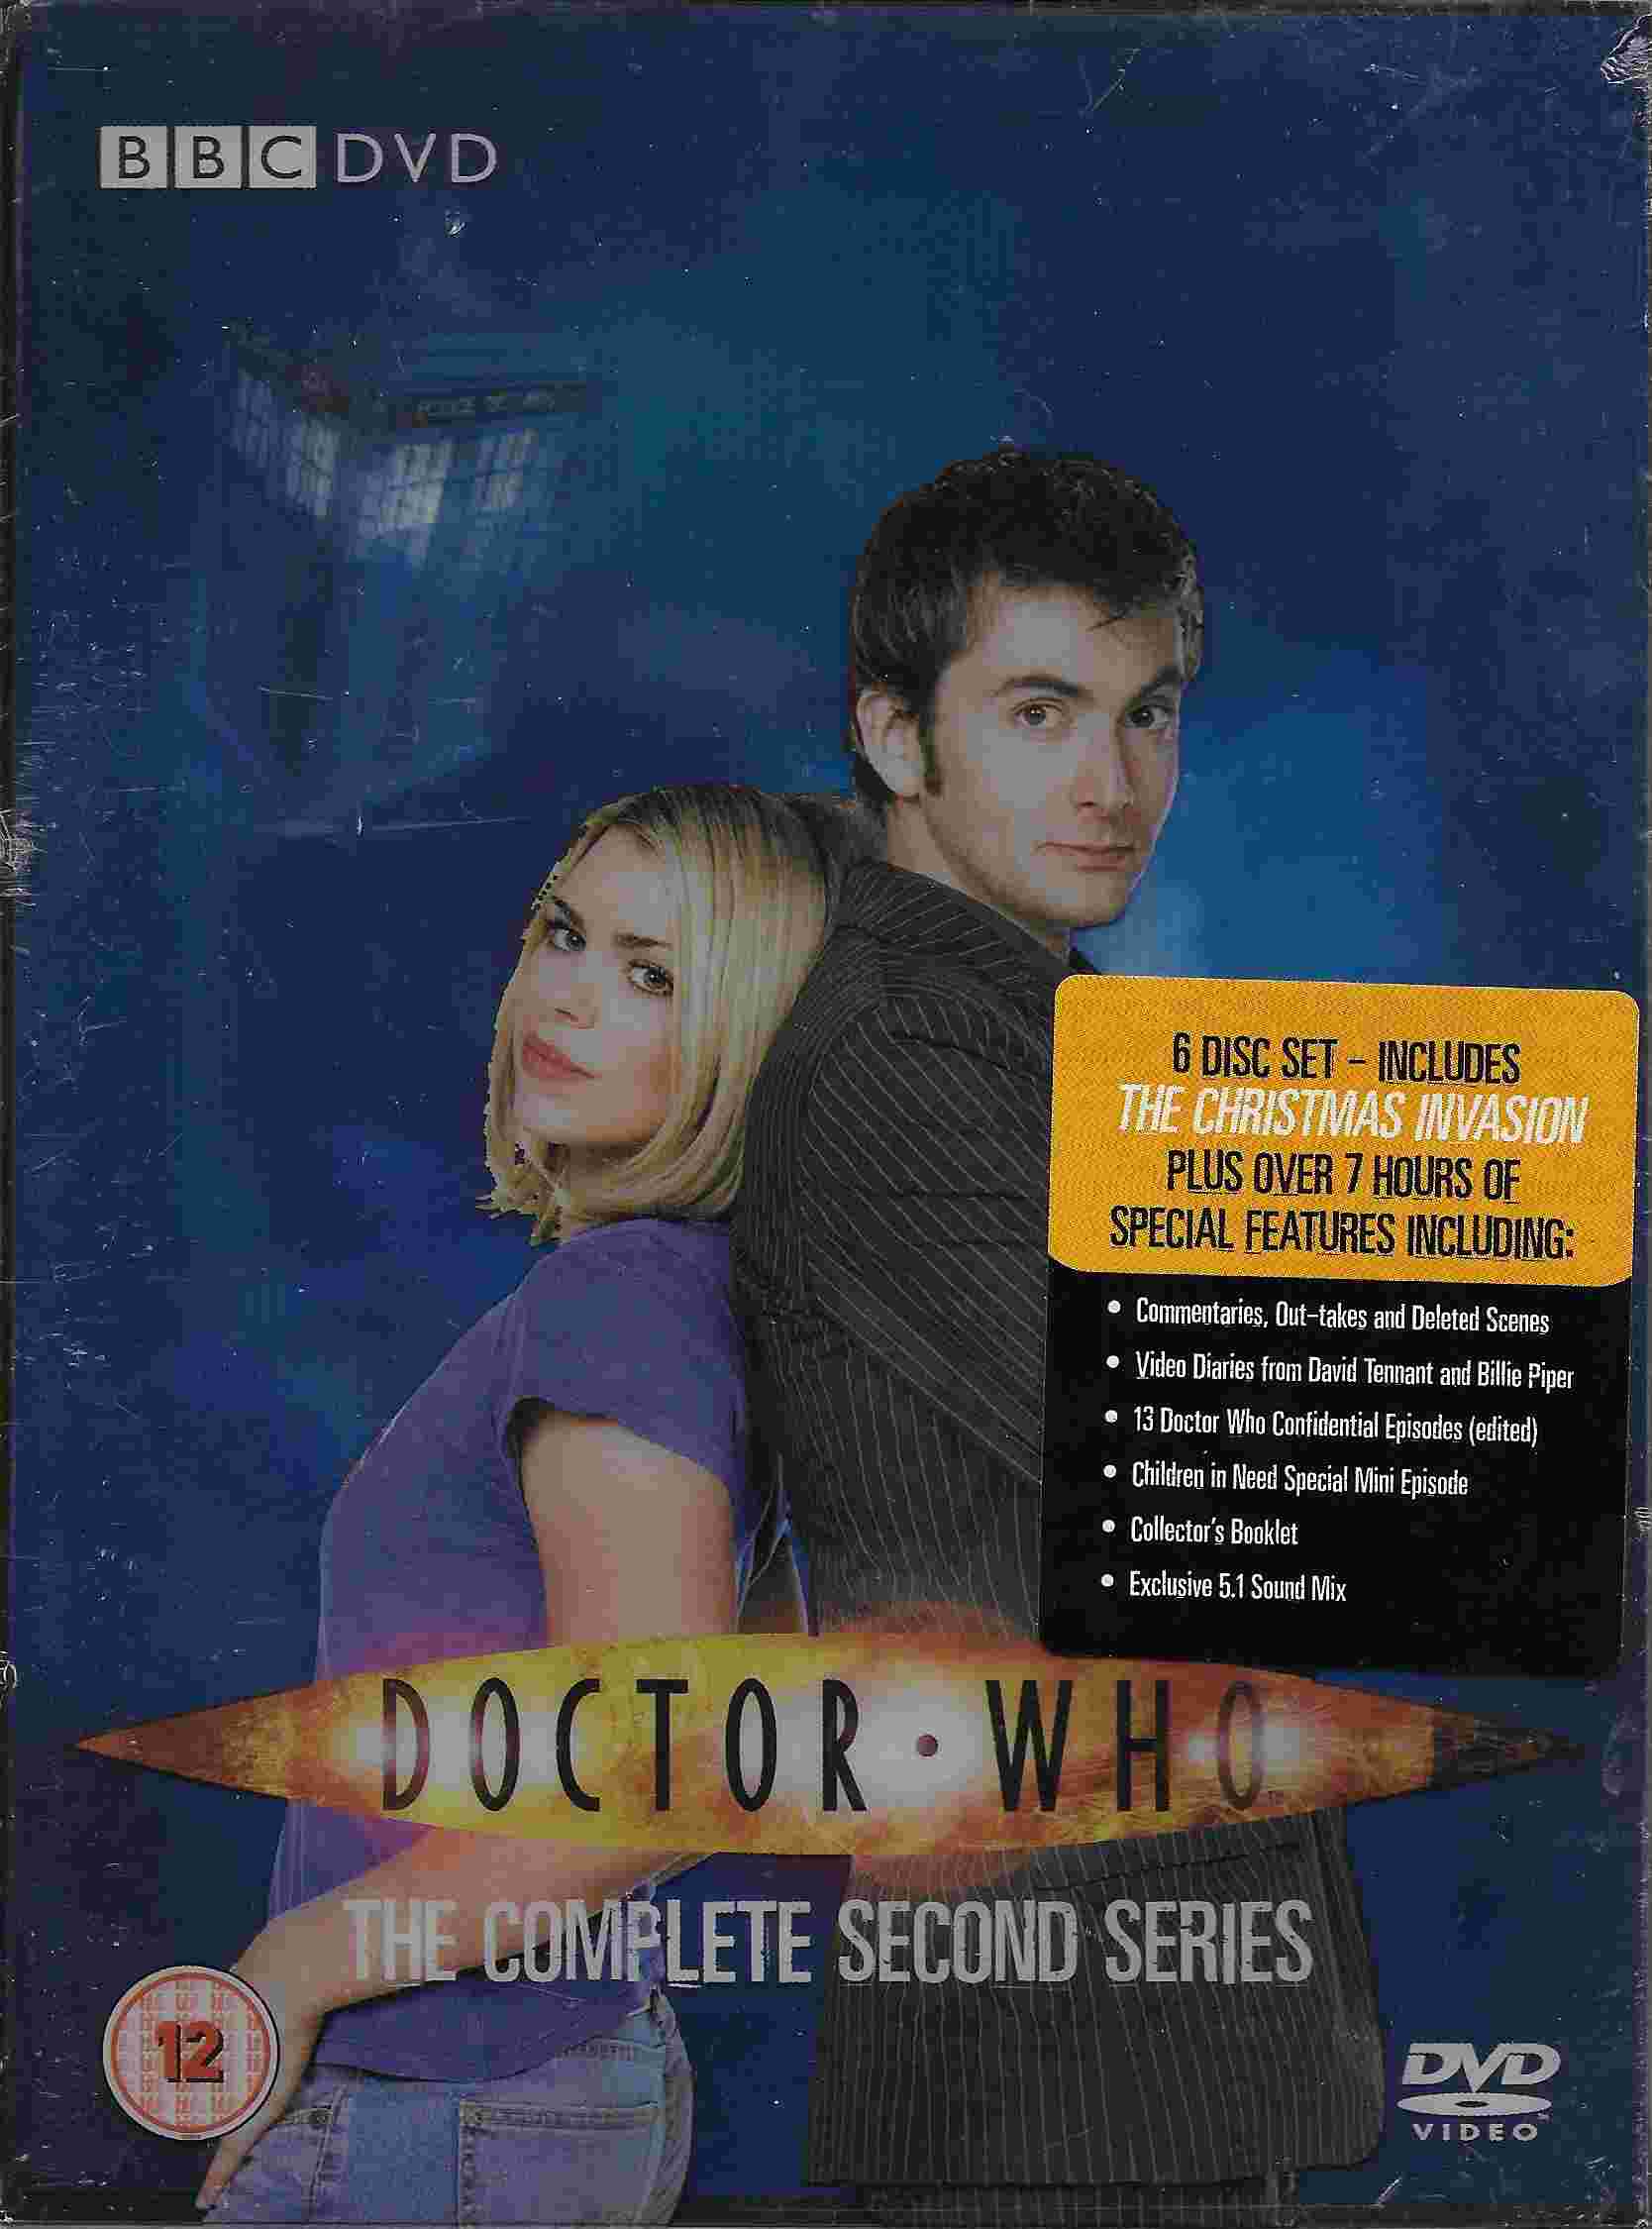 Picture of BBCDVD 2122 Doctor Who - Series 2 by artist Various from the BBC dvds - Records and Tapes library